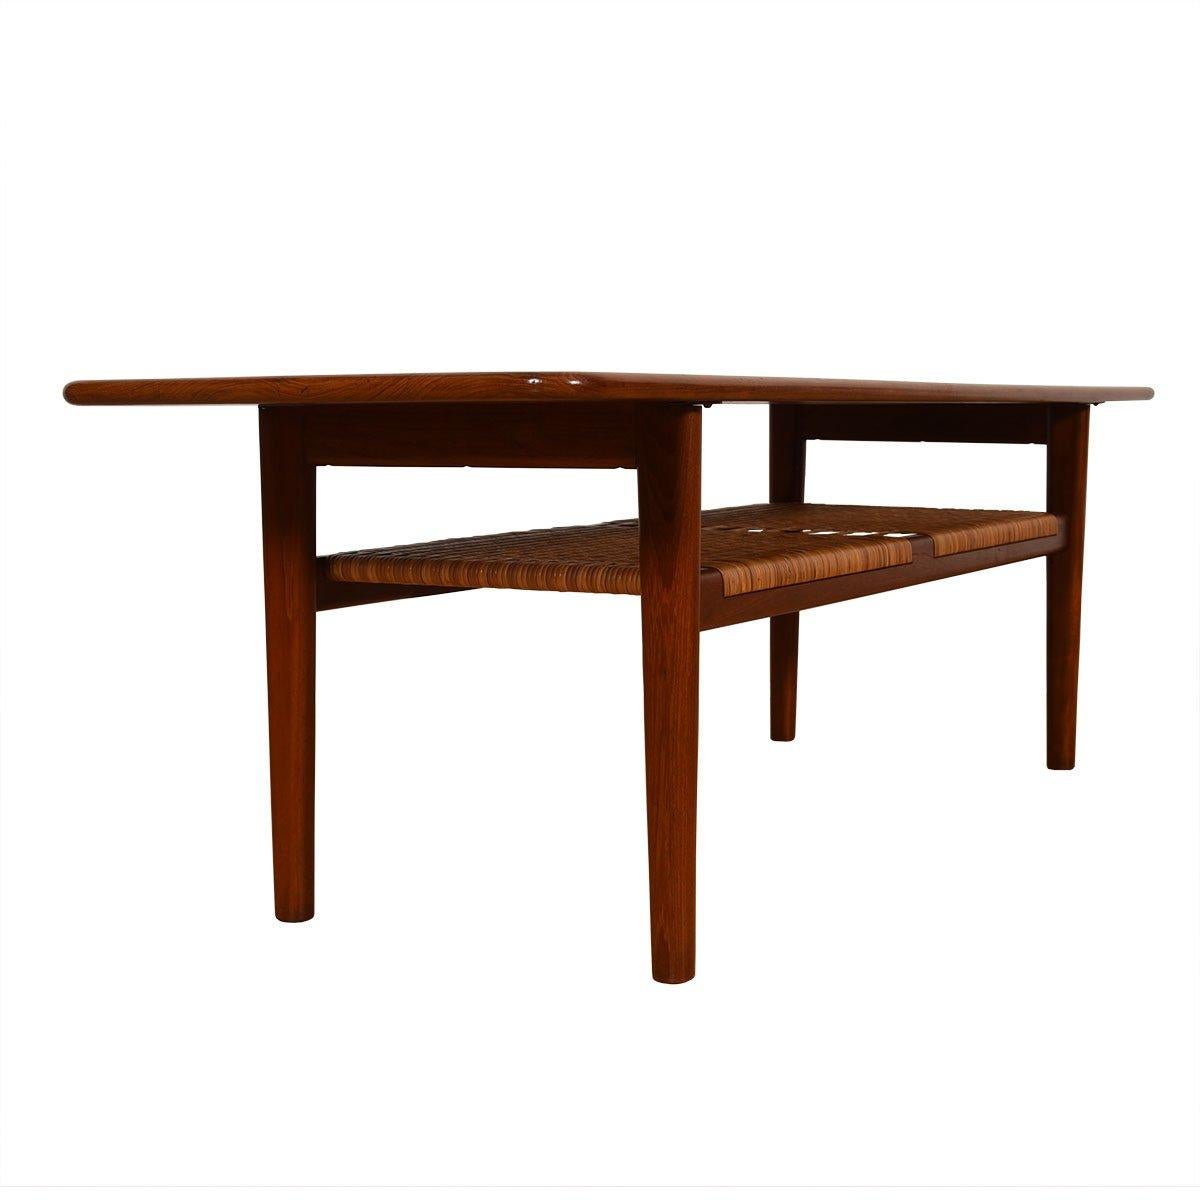 Danish Teak Coffee Table thru Illums Bolighus by Hans Wegner for Andreas Tuck 

Additional information:
Material: Teak
This is the Model AT-10 Table by Hans Wegner for Andreas Tuck. With beautiful lines and proportions, a long length of teak